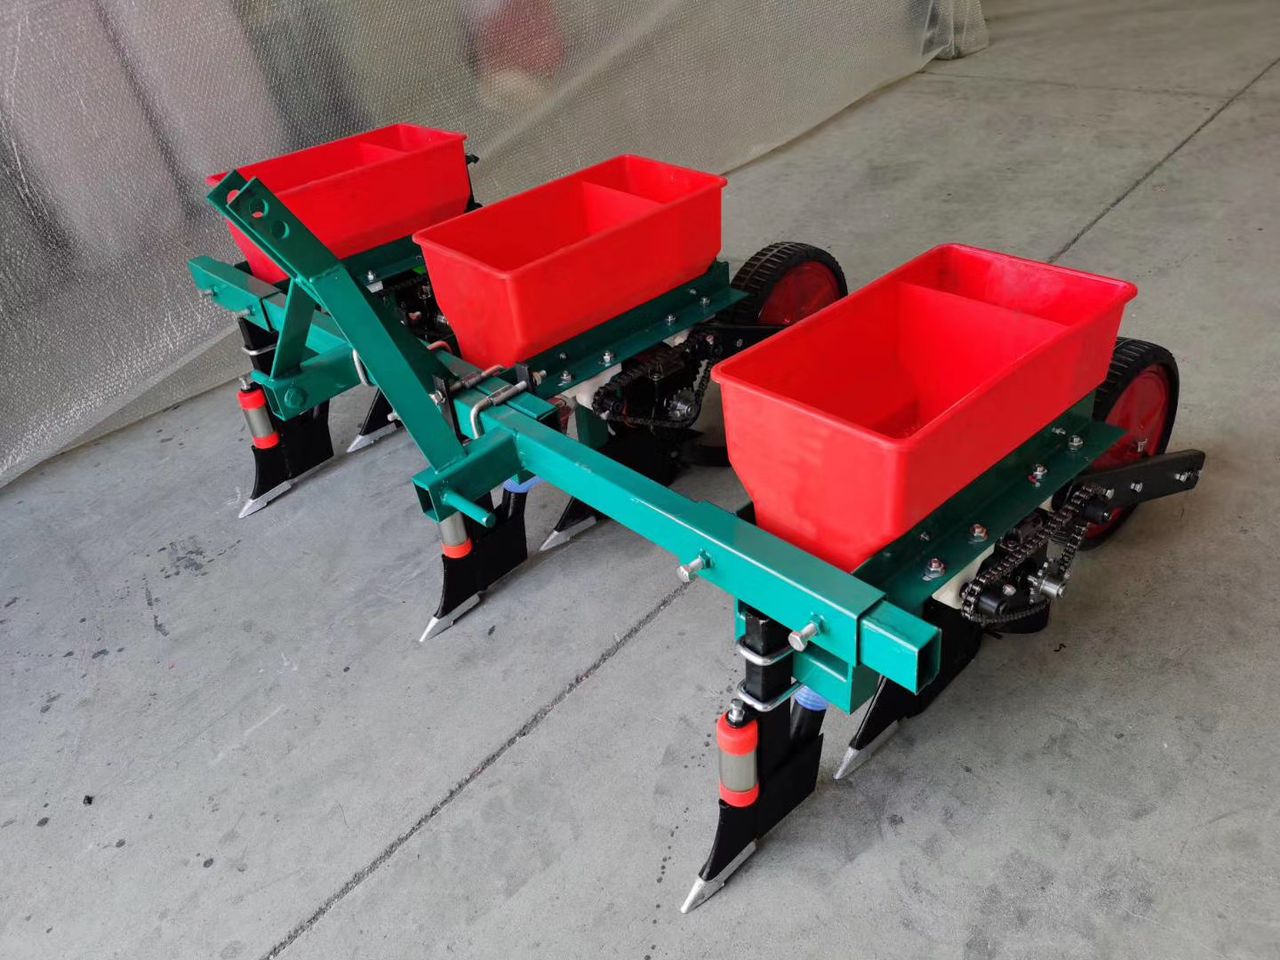 Walking Tractor with Traction Corn Precision Sowing Machine, Corn